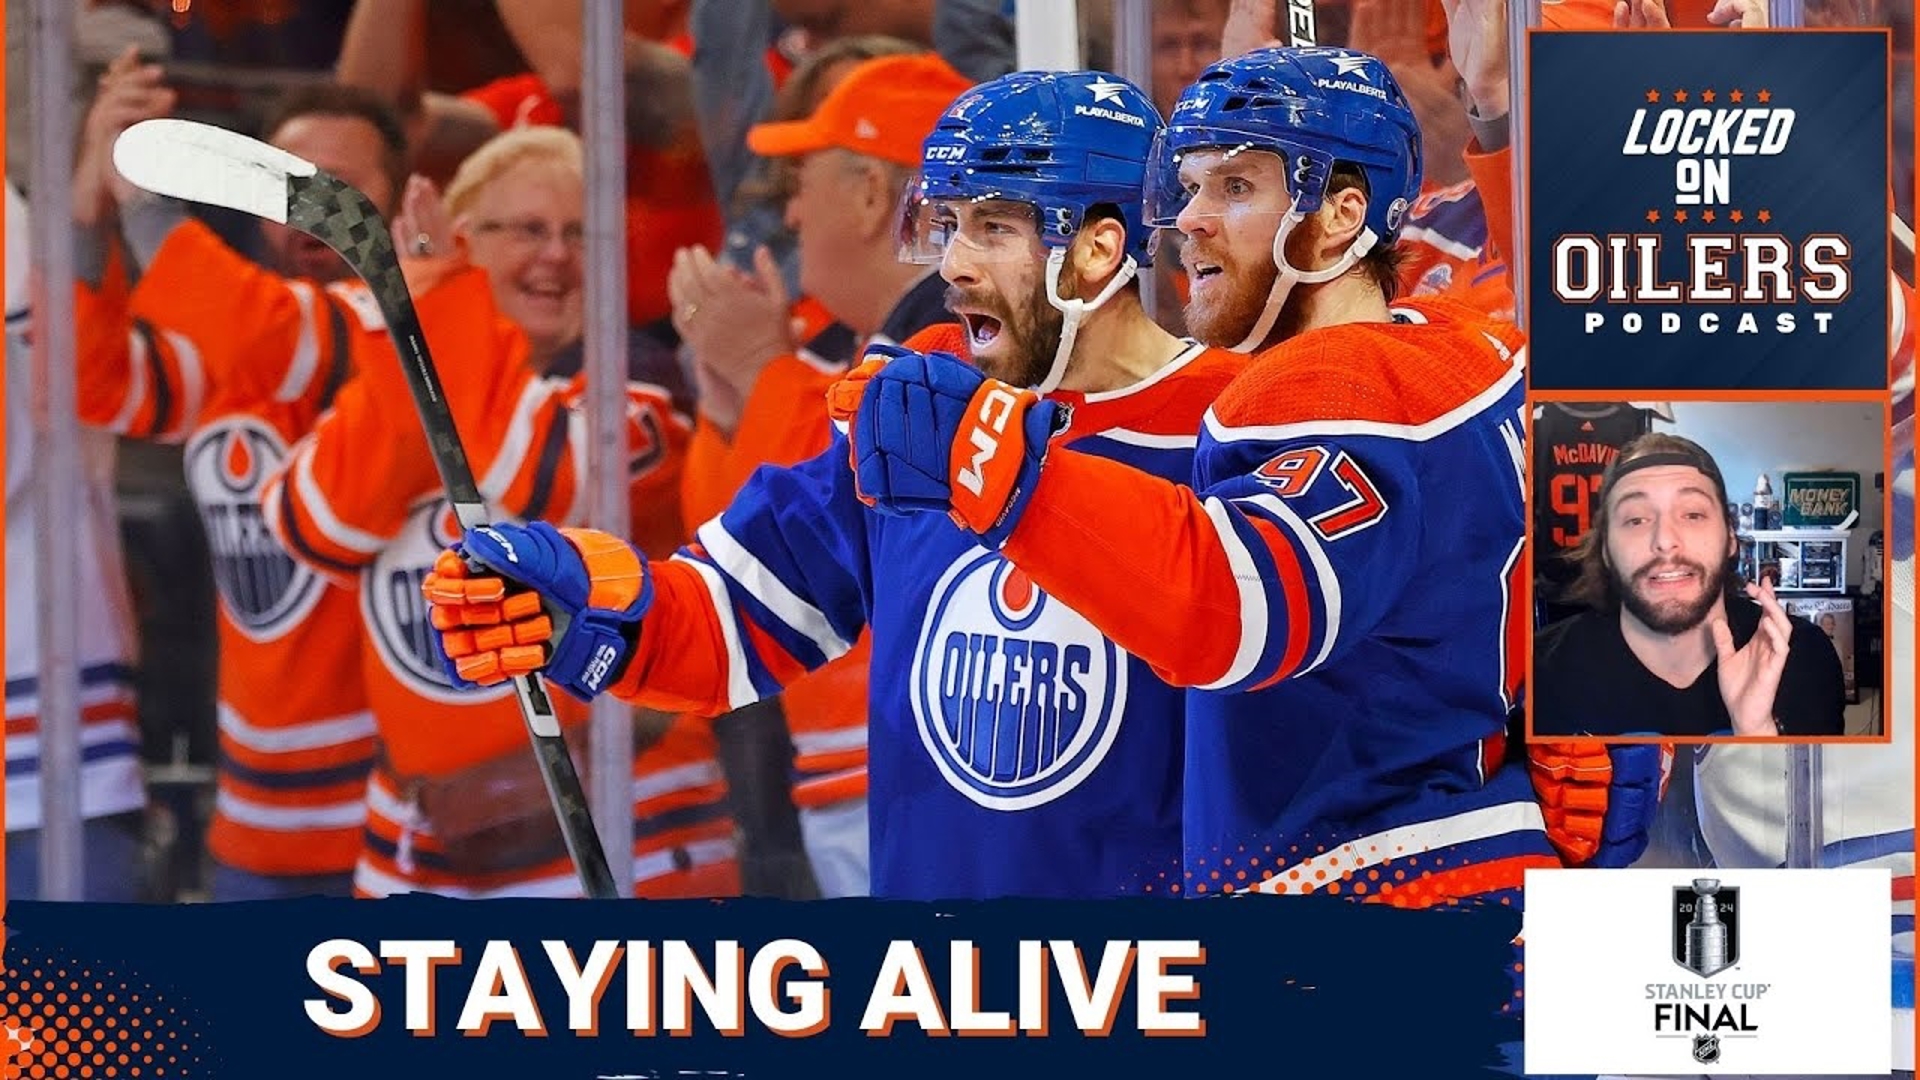 Join host Nick Zararis on this episode of Locked on Oilers for a breakdown of the Oilers' eight goal explosion Saturday night to stave off elimination.